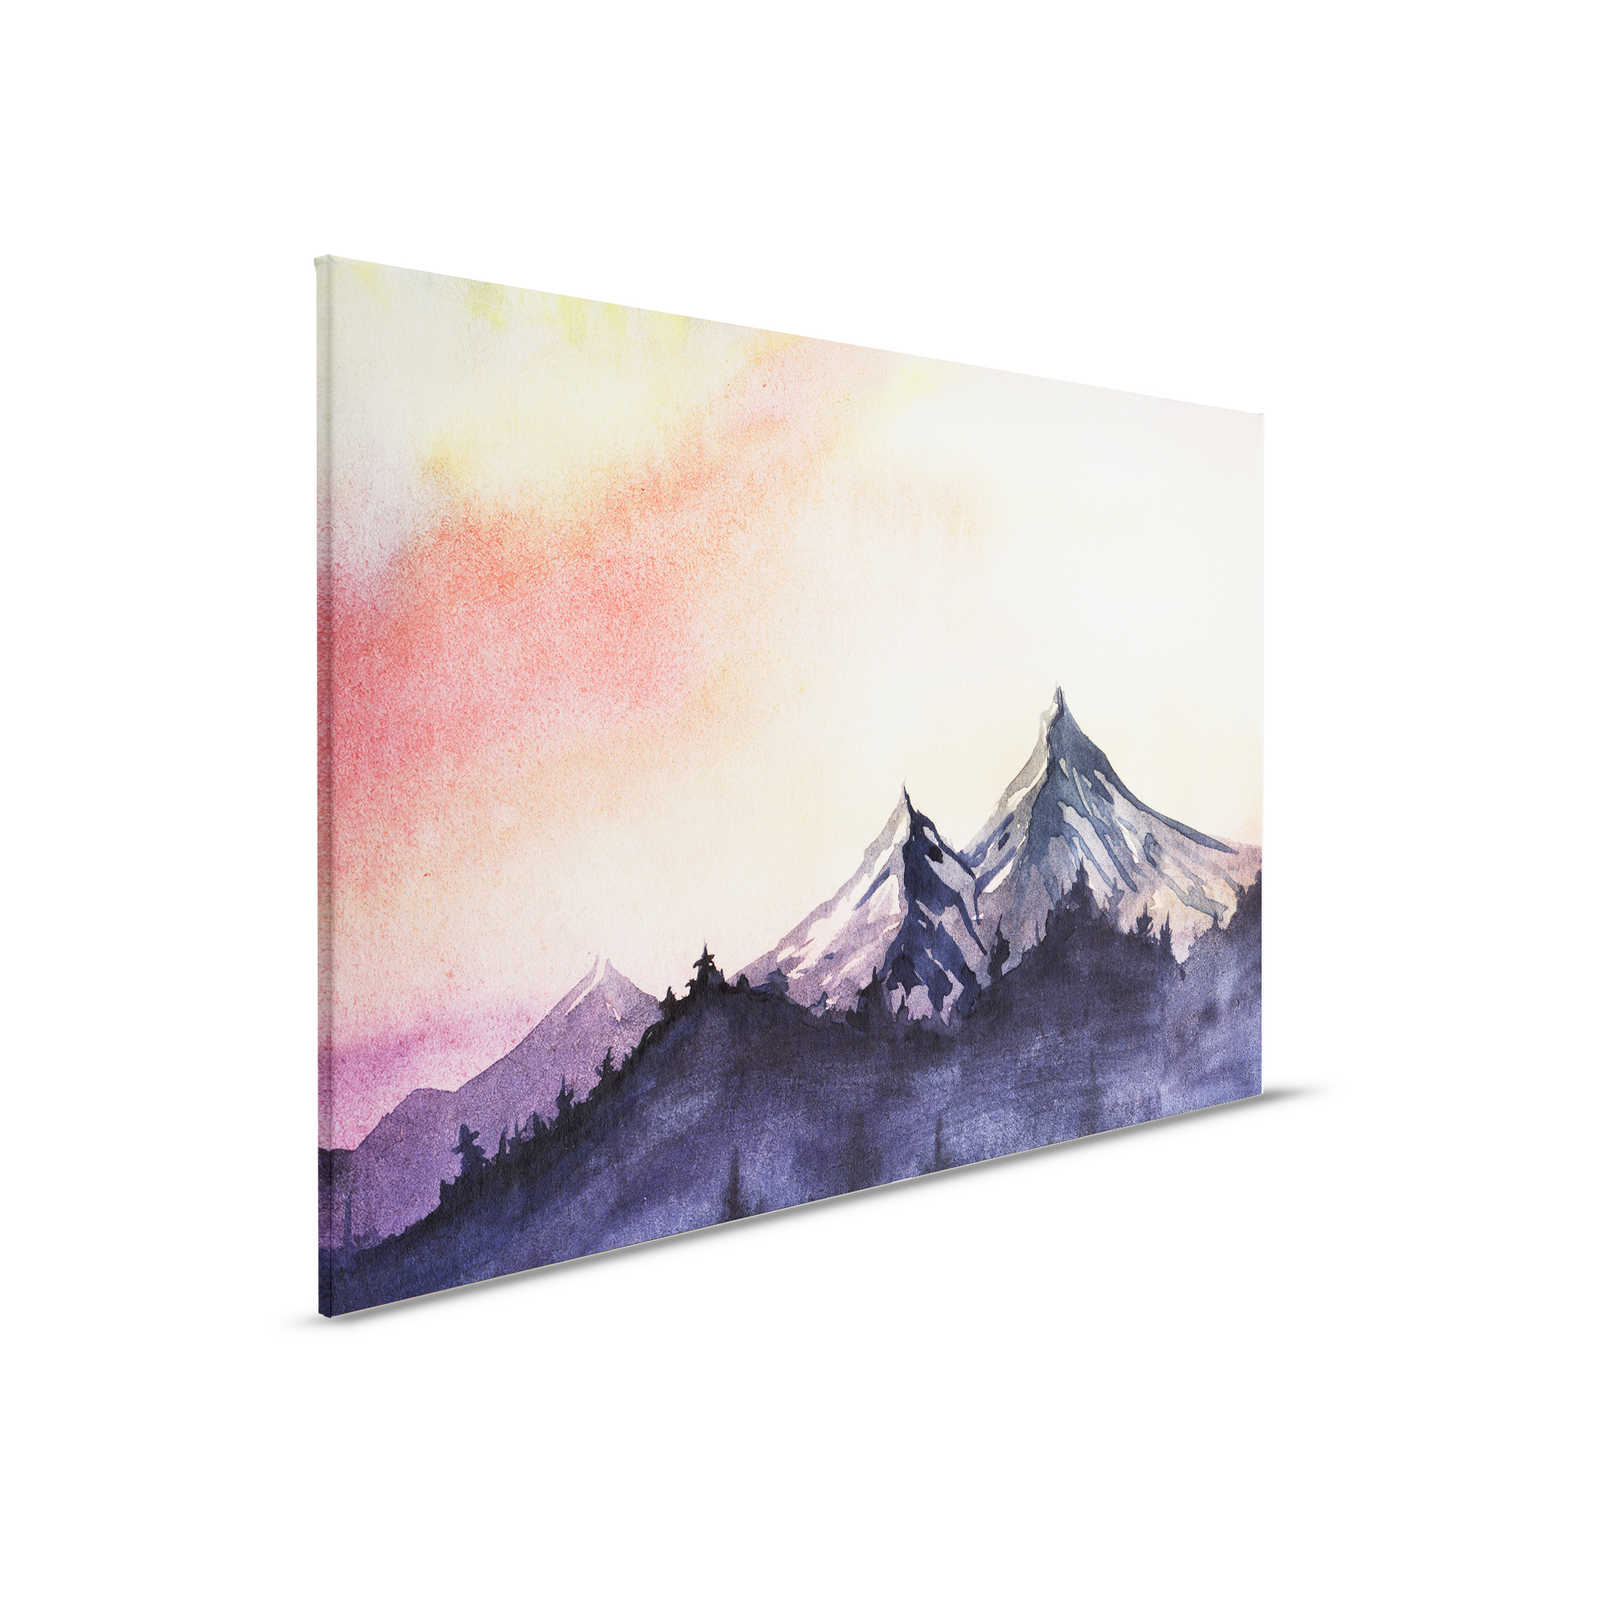         Canvas wall with mountain landscape in watercolour style - 0.90 m x 0.60 m
    